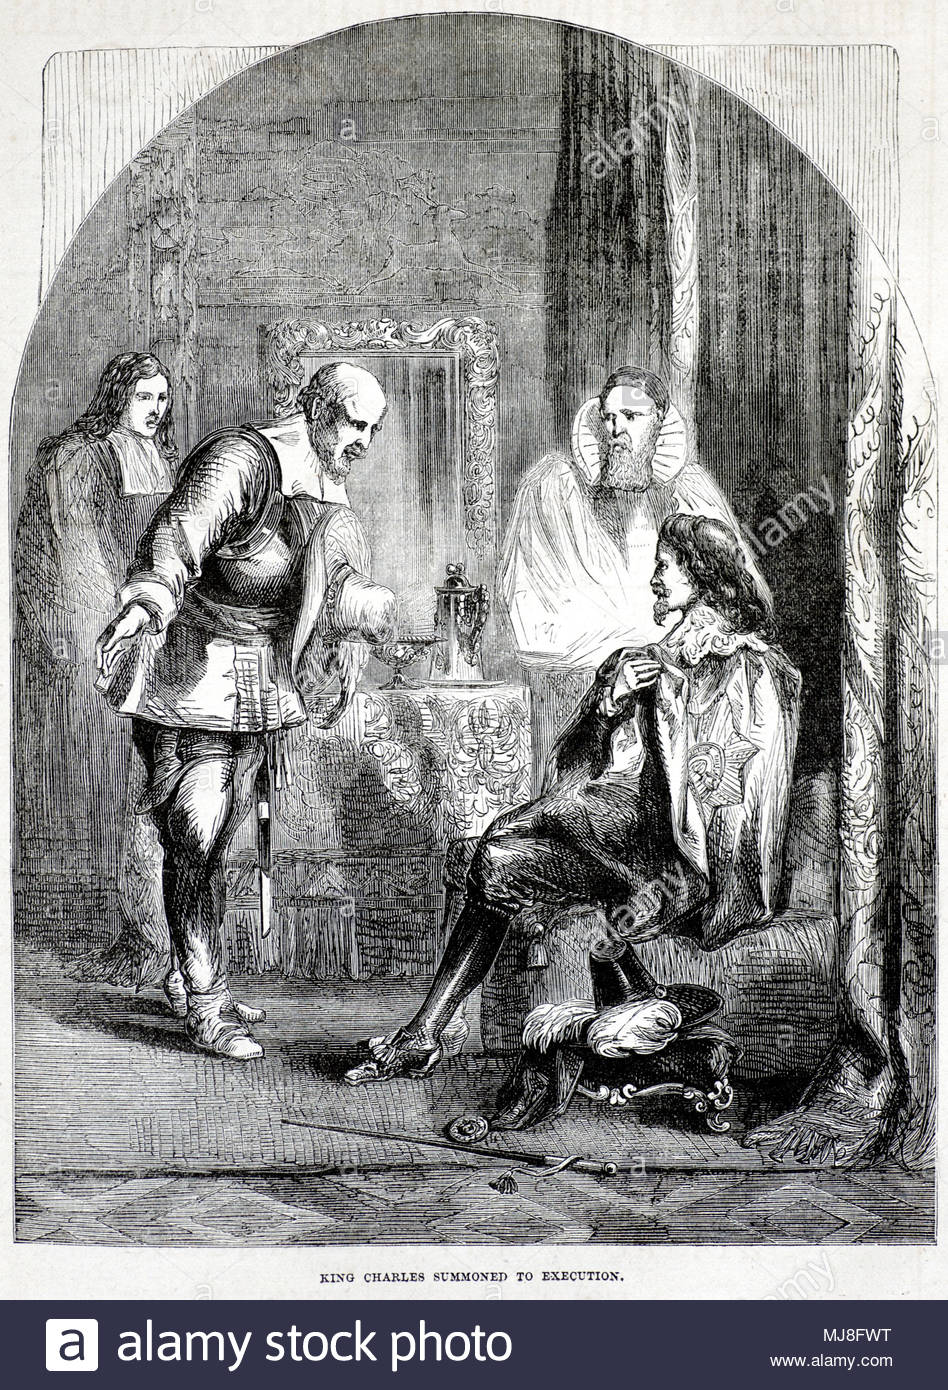 King Charles I being summoned to his execution on 30th January 1649, antique illustration from circa 1880 Stock Photo